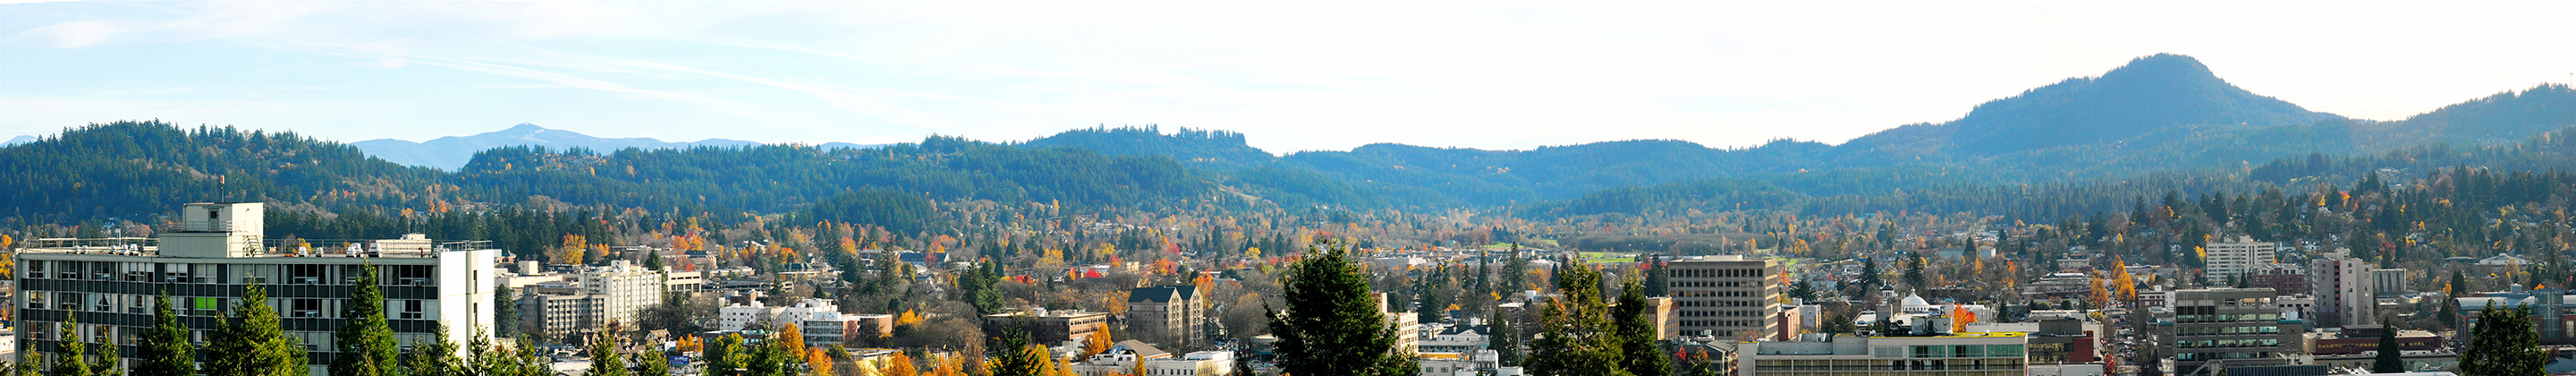 A panoramic shot shows the Eugene landscape, with low-lying buildings and hilly terrain in the distance.